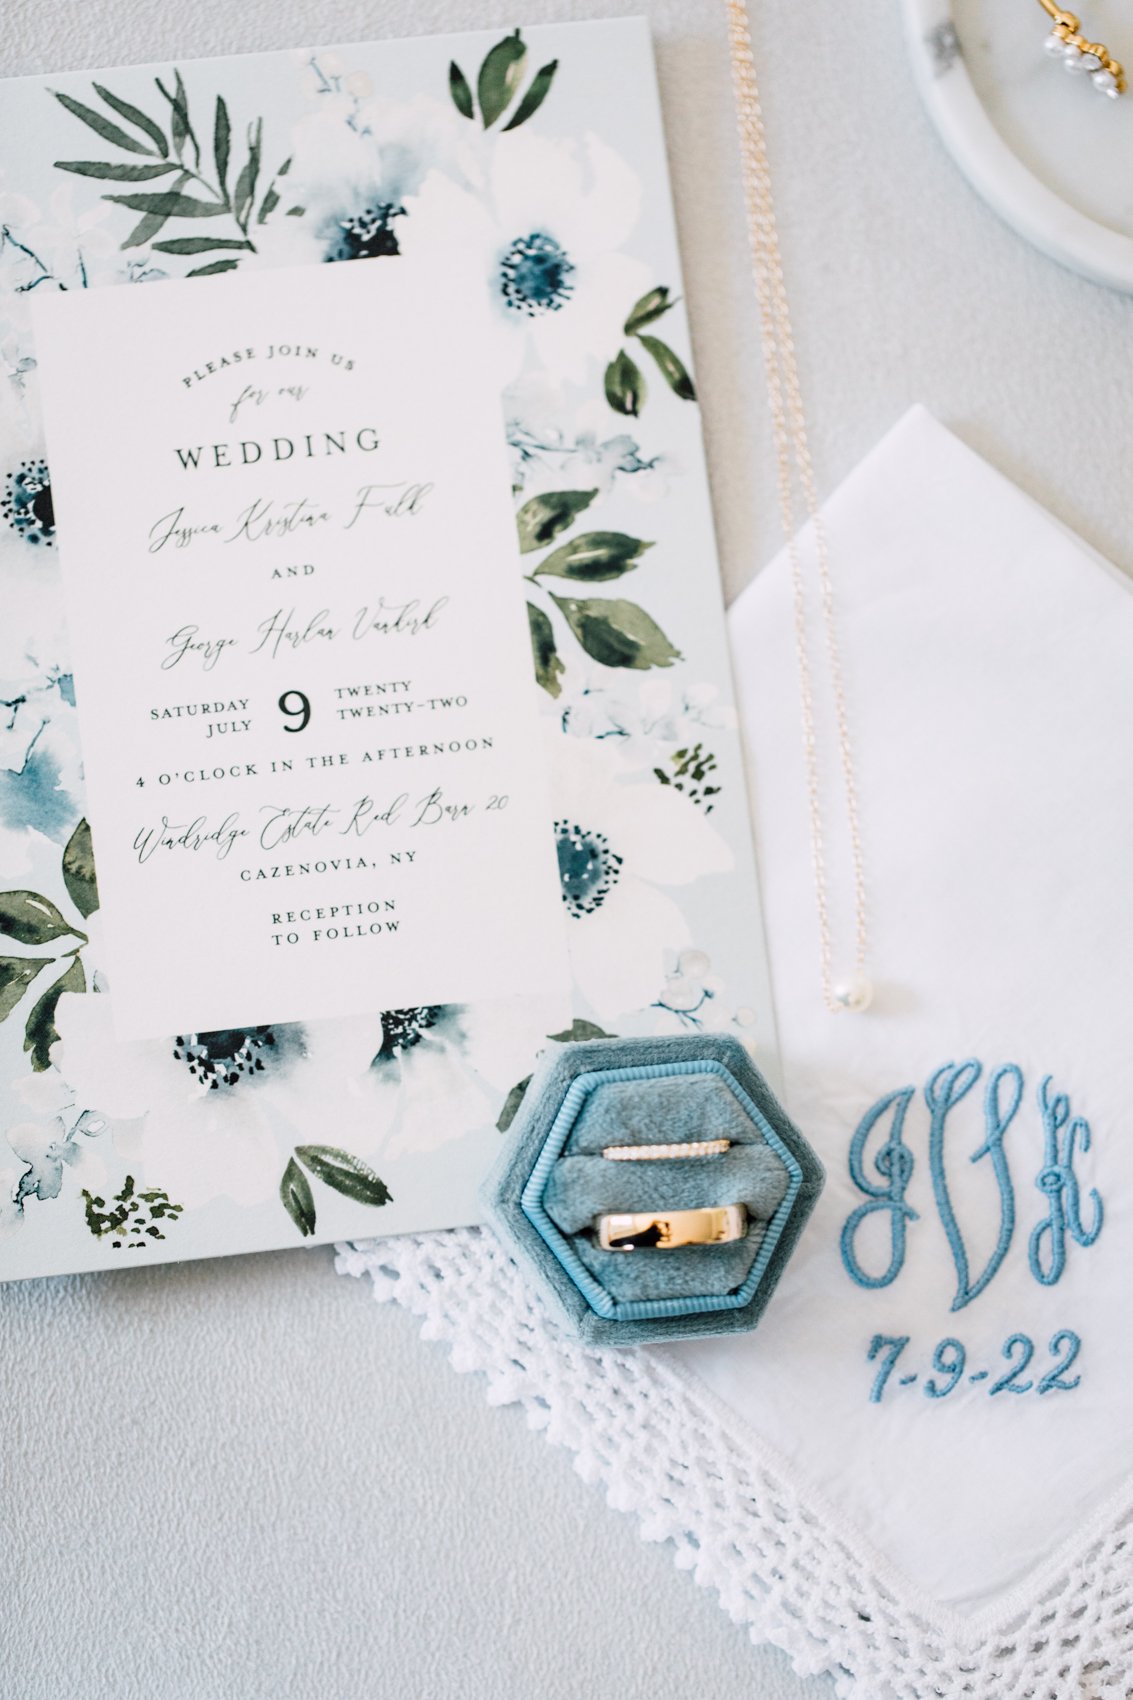  Layflat of a wedding invitation, embroidered handkerchief, necklace, and wedding rings with blue and white color scheme 